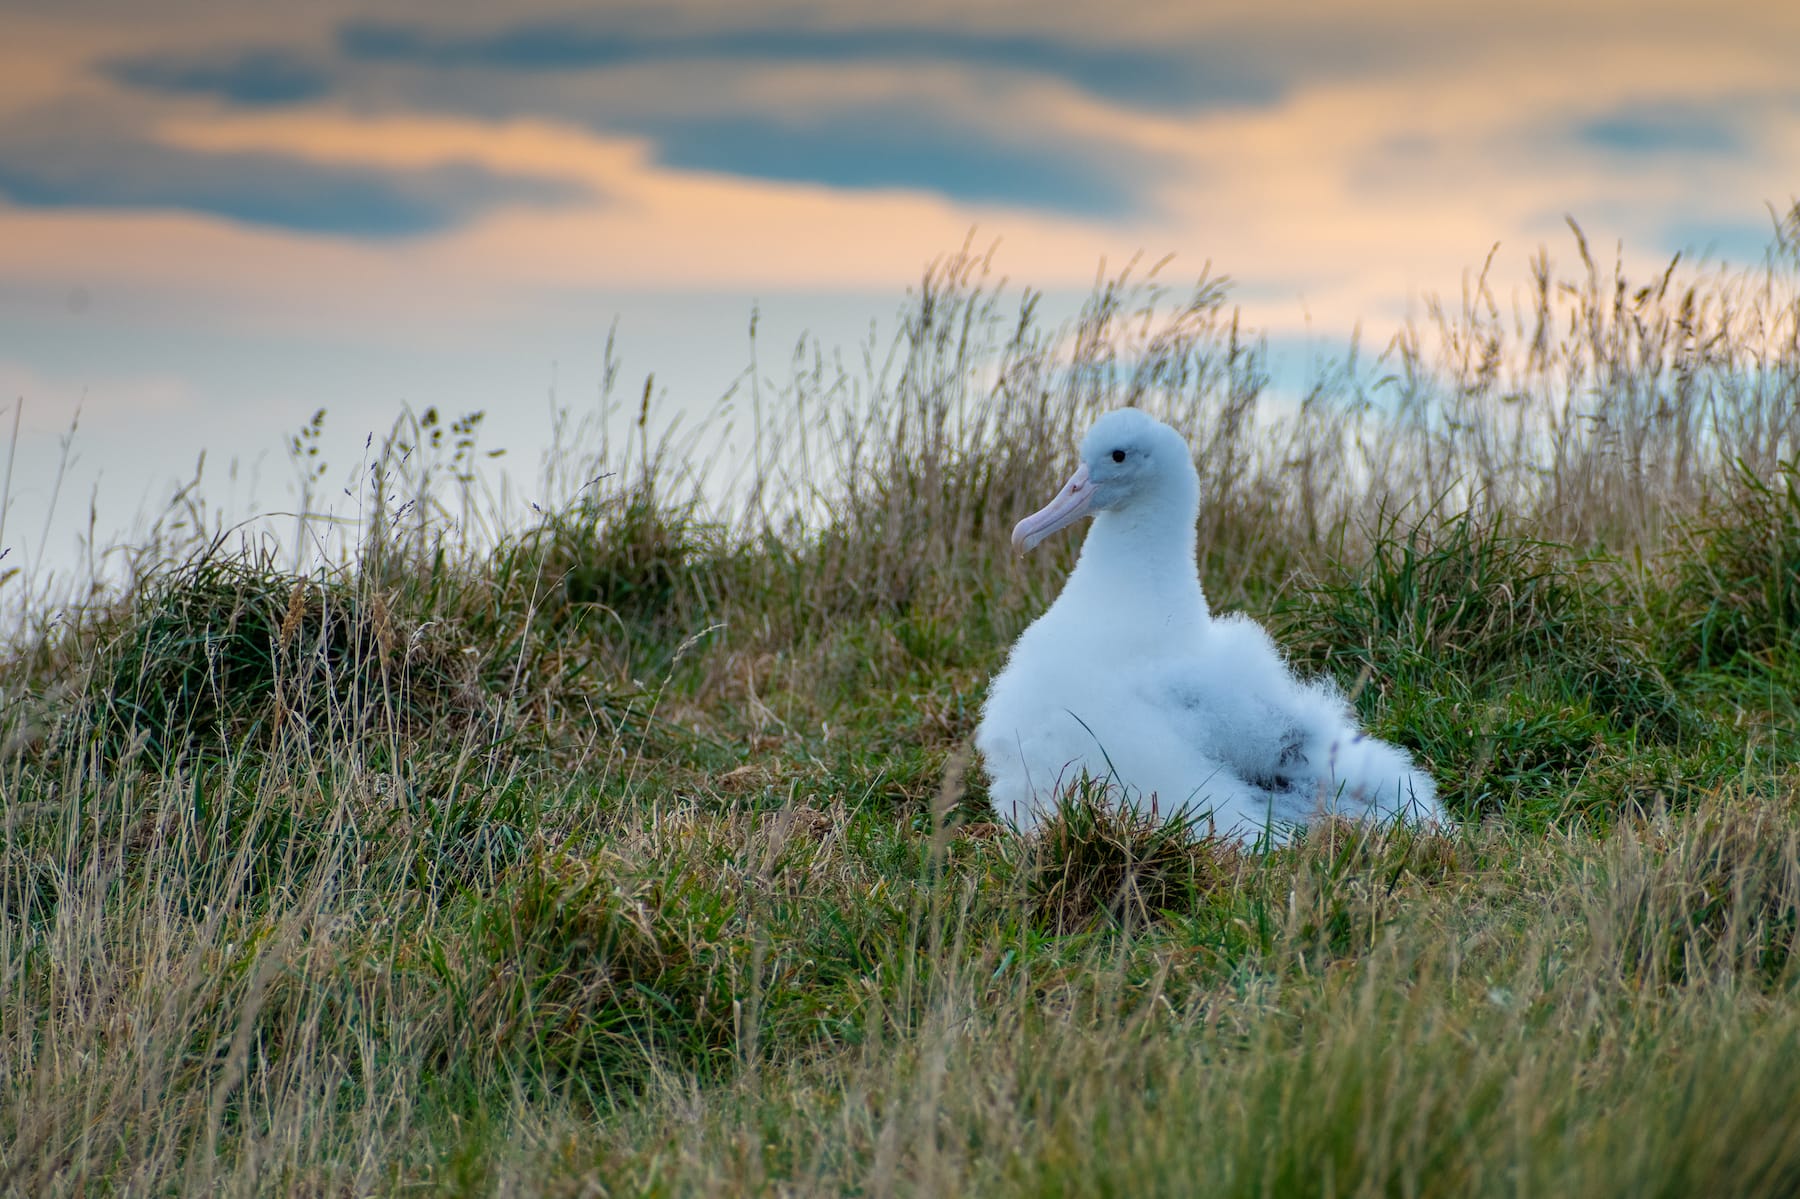 Why You Absolutely Need To Visit The Taiaroa Head and The Royal Albatross Centre When Visiting Dunedin!